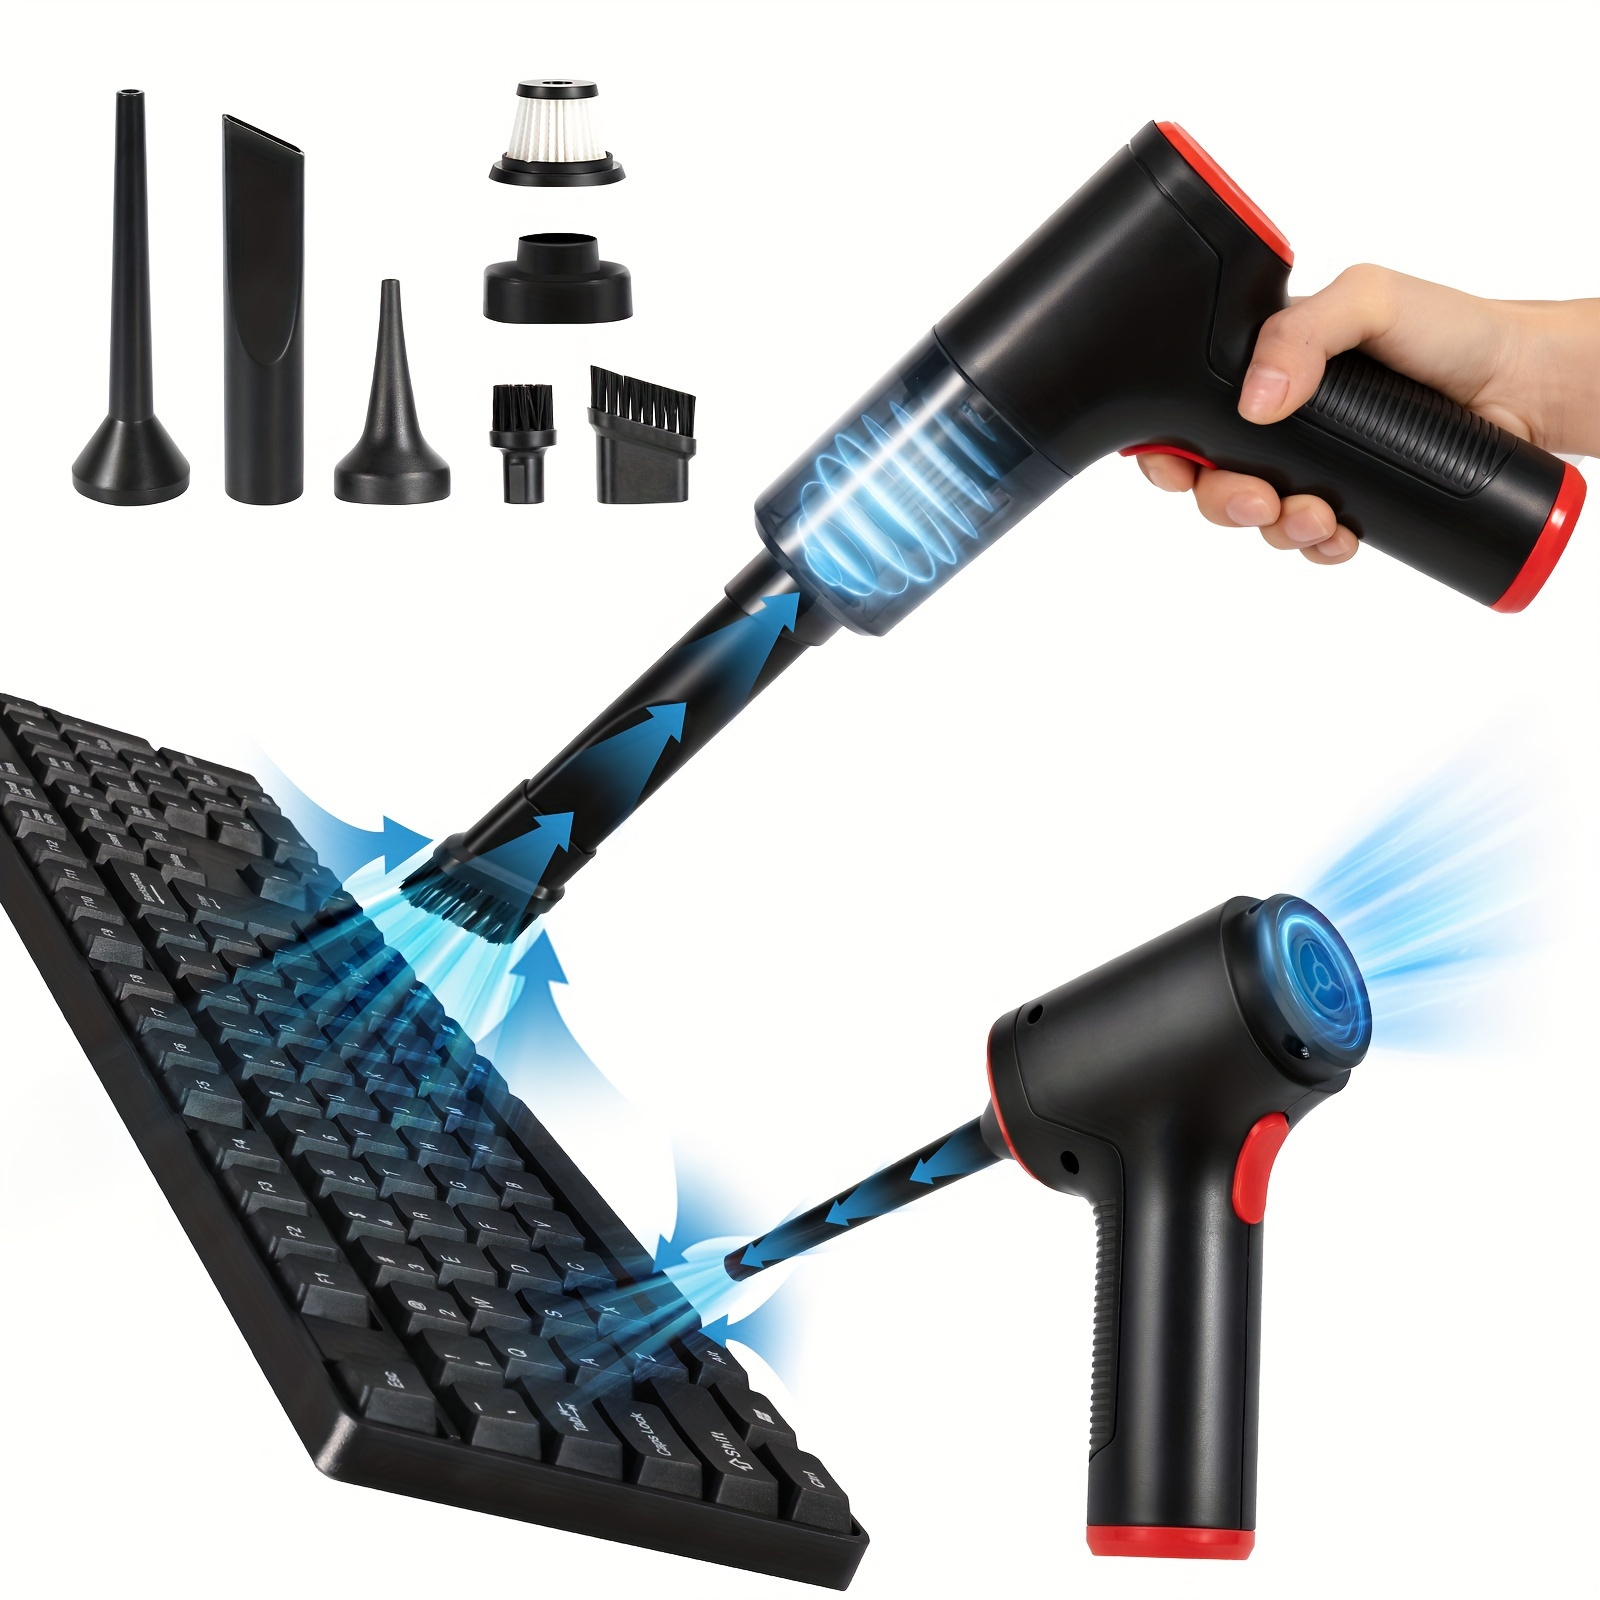 3-in-1 Computer Vacuum, Compressed Air Duster Blower, Portable